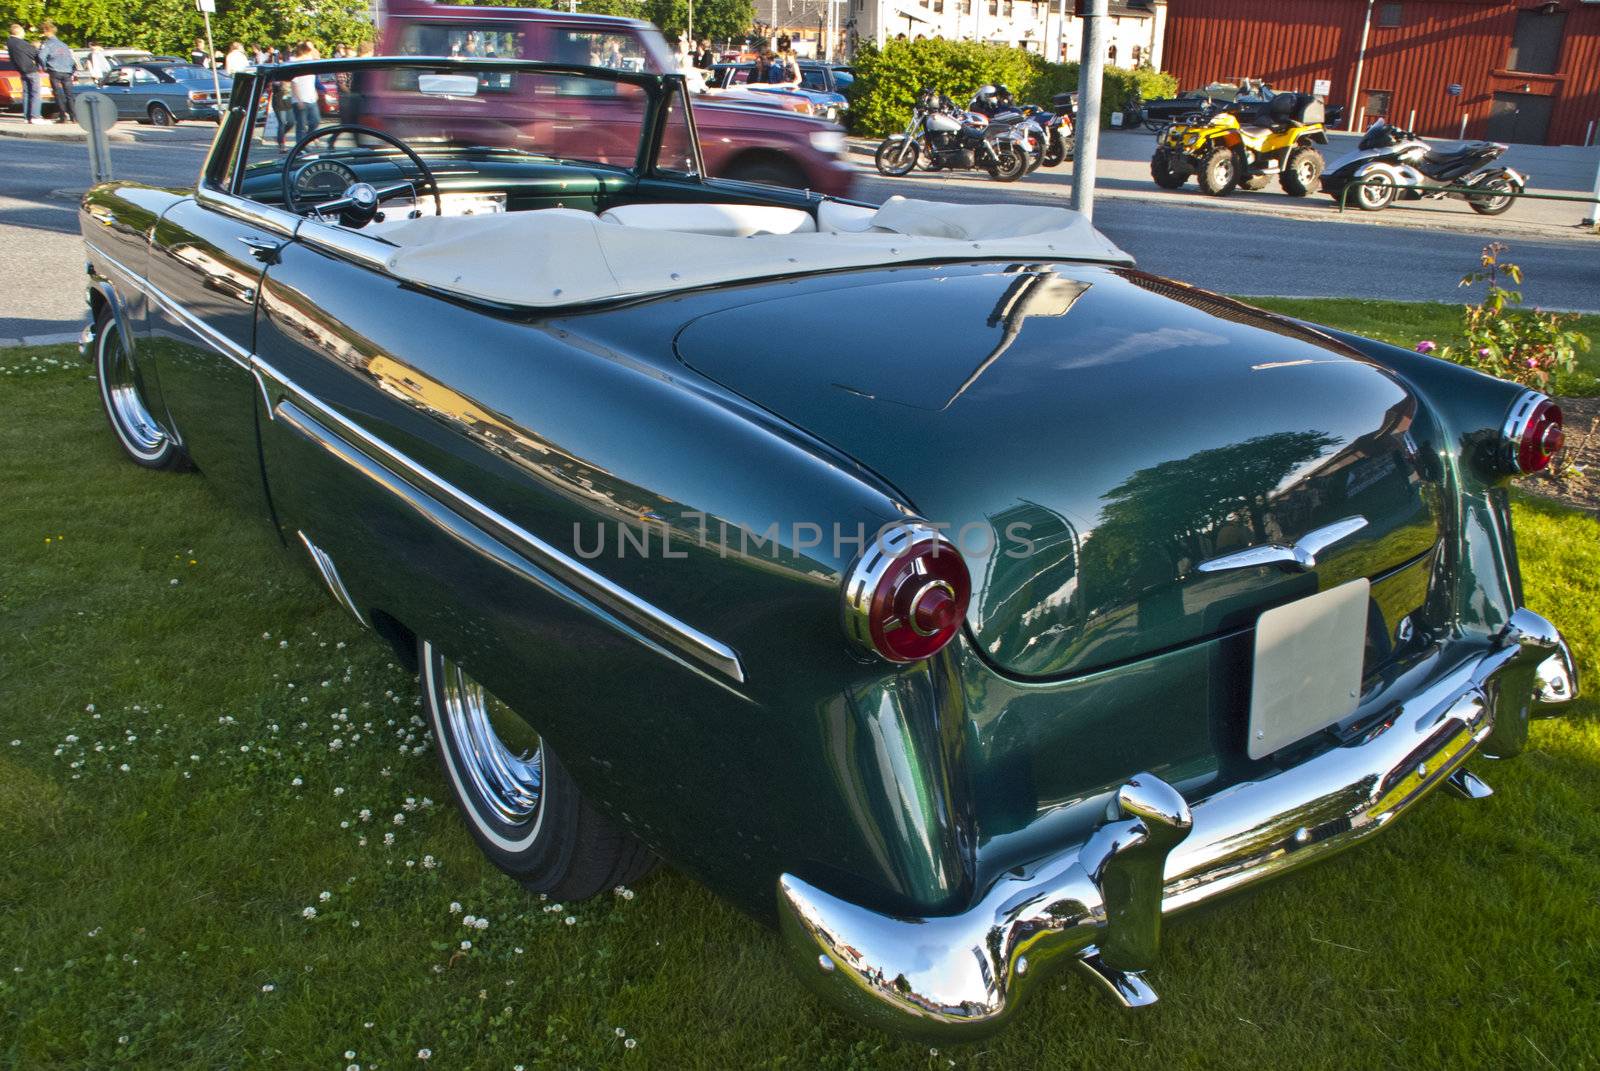 Each Wednesday during the summer months there is show of American vintage cars in the center of Halden city.